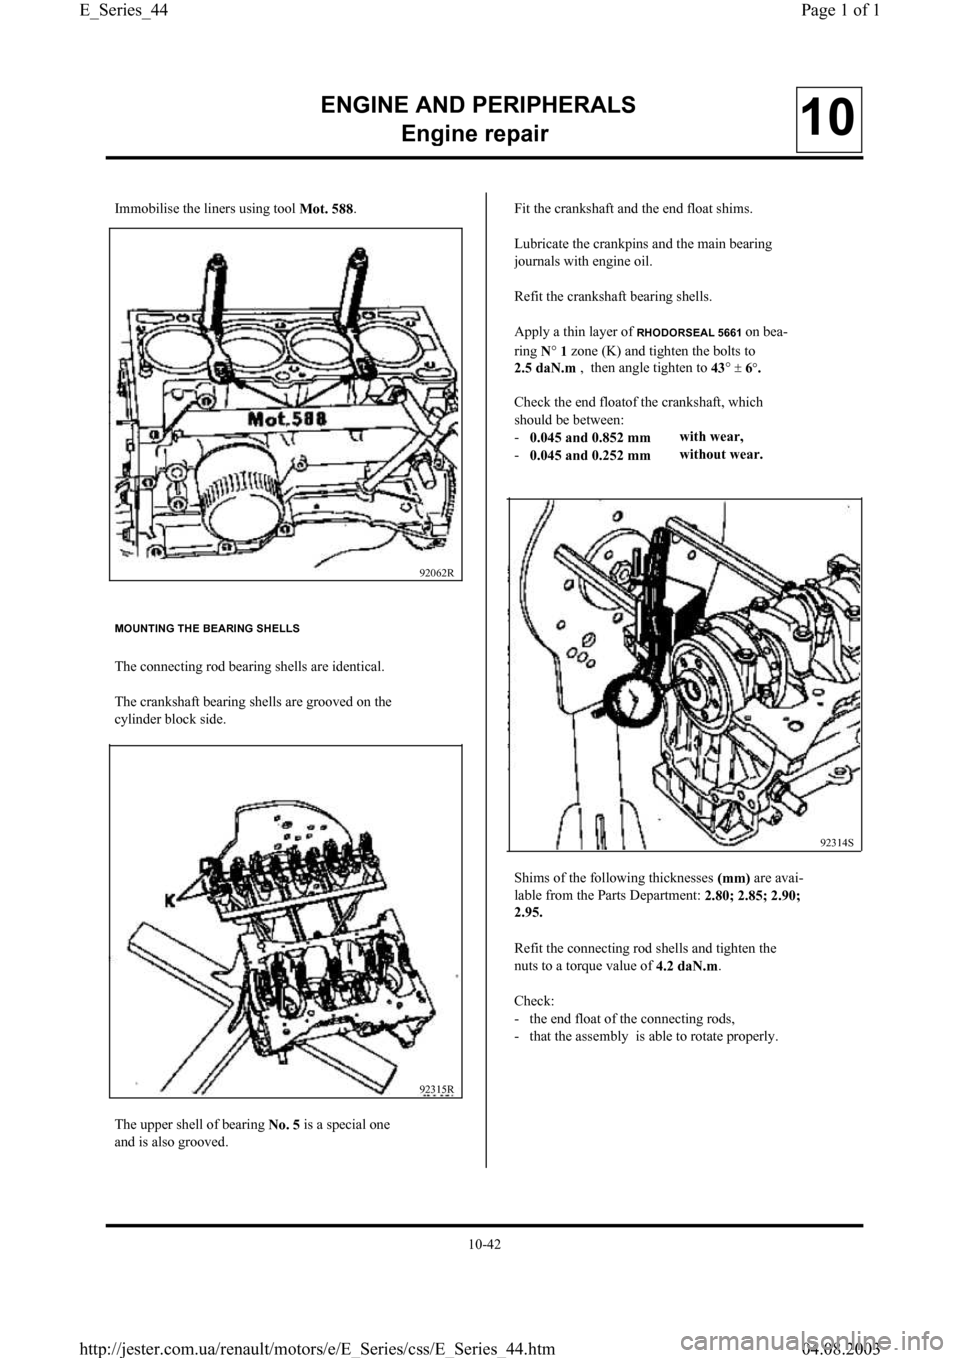 RENAULT CLIO 1997 X57 / 1.G Petrol Engines Workshop Manual ENGINE AND PERIPHERALS
En
gine repair10
Immobilise the liners using tool 
Mot. 588.
92062R
Shims of the following thicknesses (mm) are avai-
lable from the Parts Department: 
2.80; 2.85; 2.90;
2.95.
R